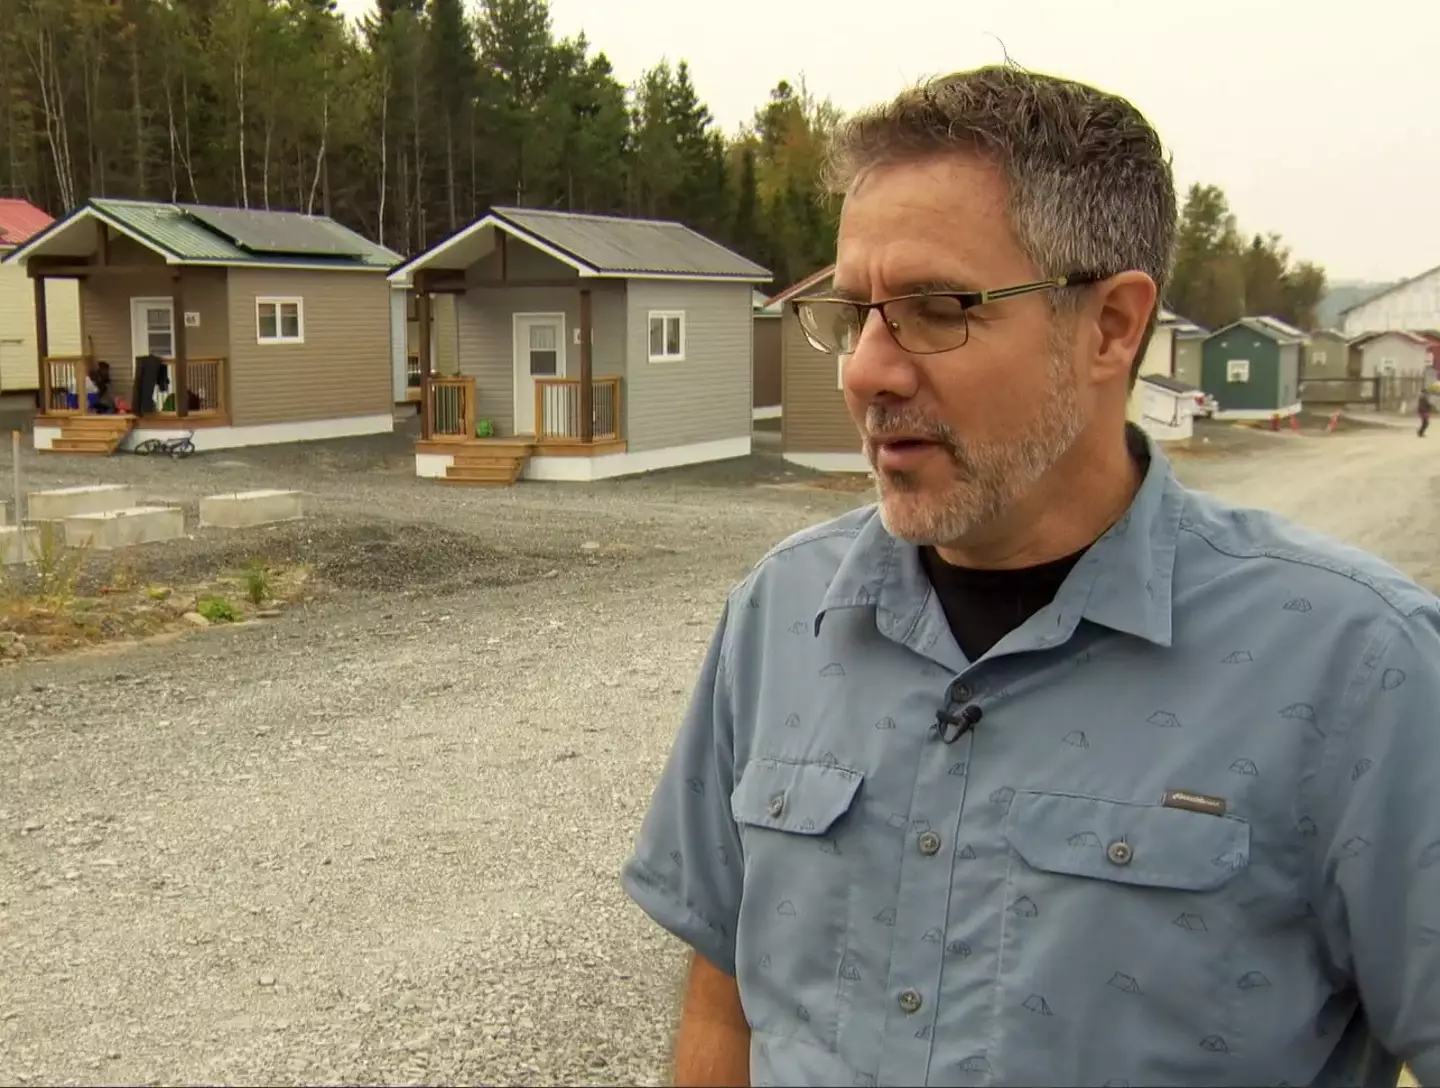 Marcel LeBrun is close to hitting his goal of building 99 houses for the homeless.